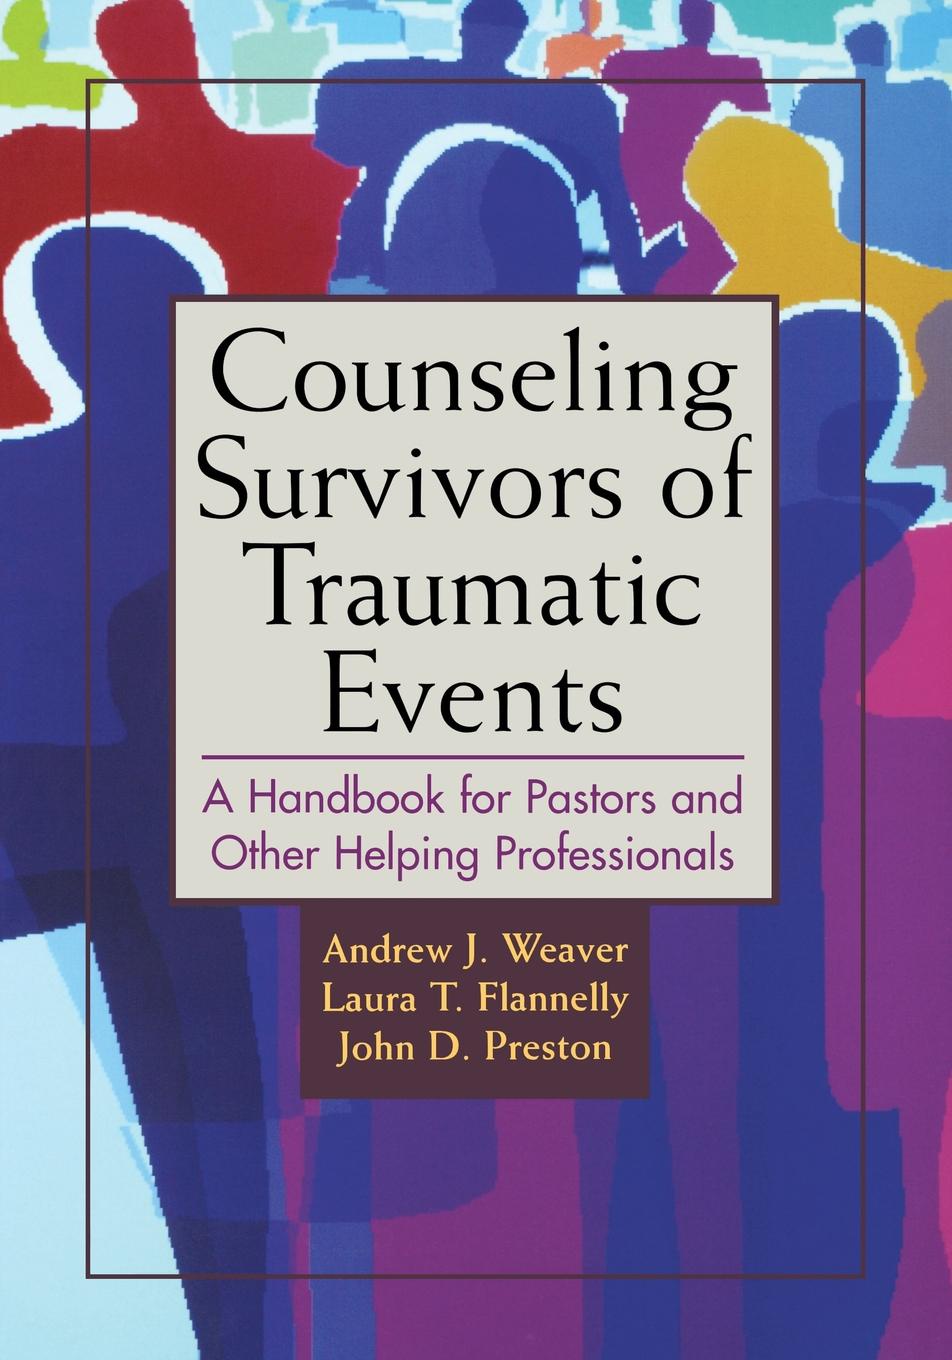 Counseling Survivors of Traumatic Events. A Handbook for Pastors and Other Helping Professionals